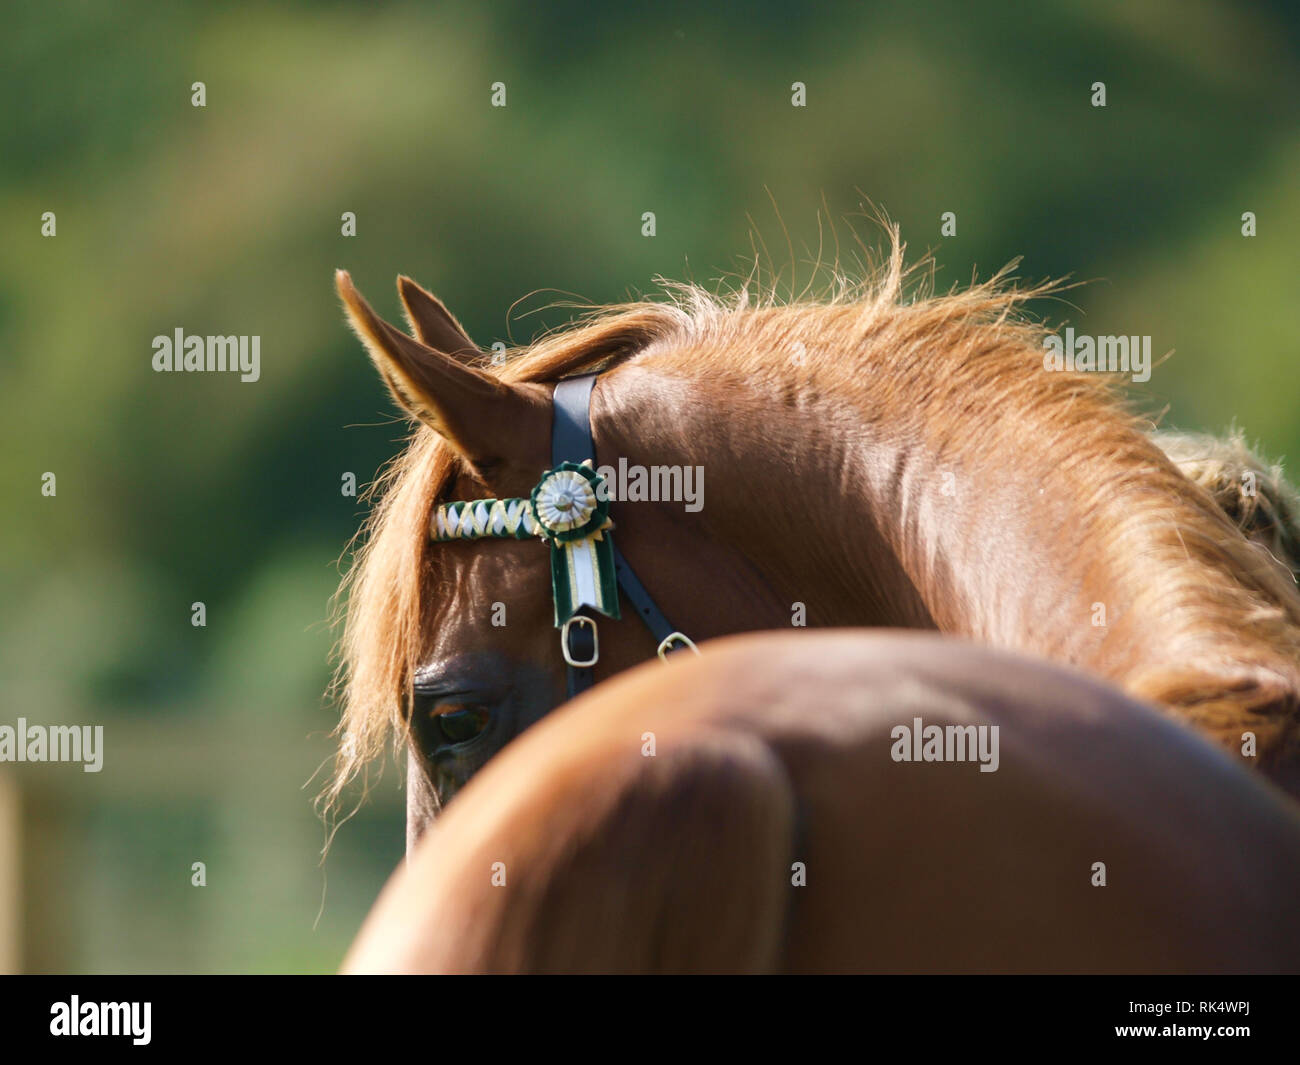 A beautiful horse shot from behind showing the curve of its back and neck. Stock Photo